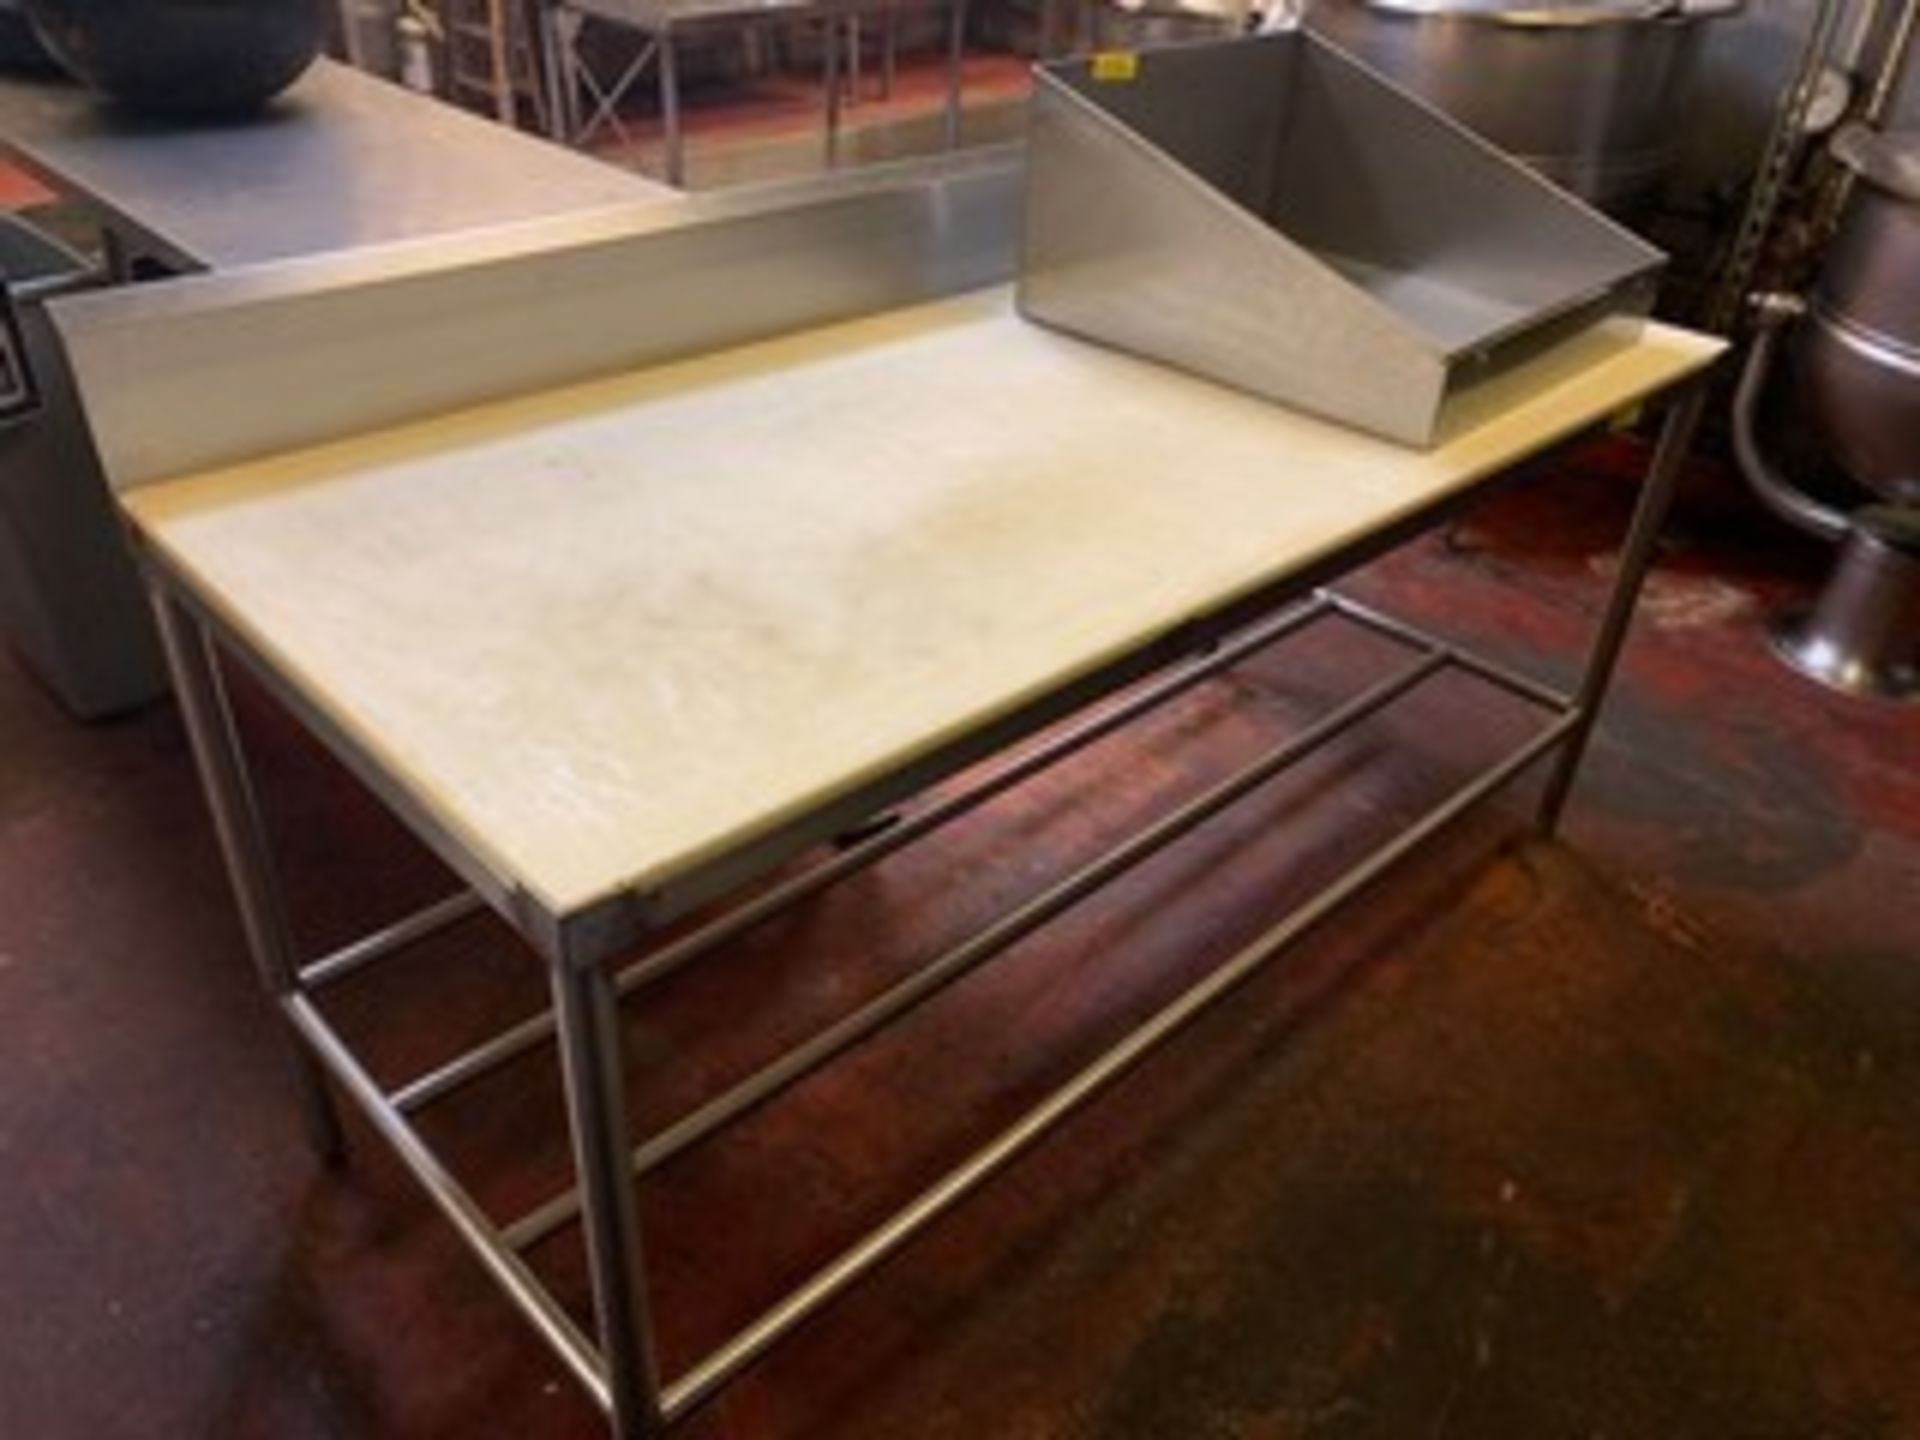 STAINLESS STEEL TABLE WITH CUTTING BOARD TOP - 6'